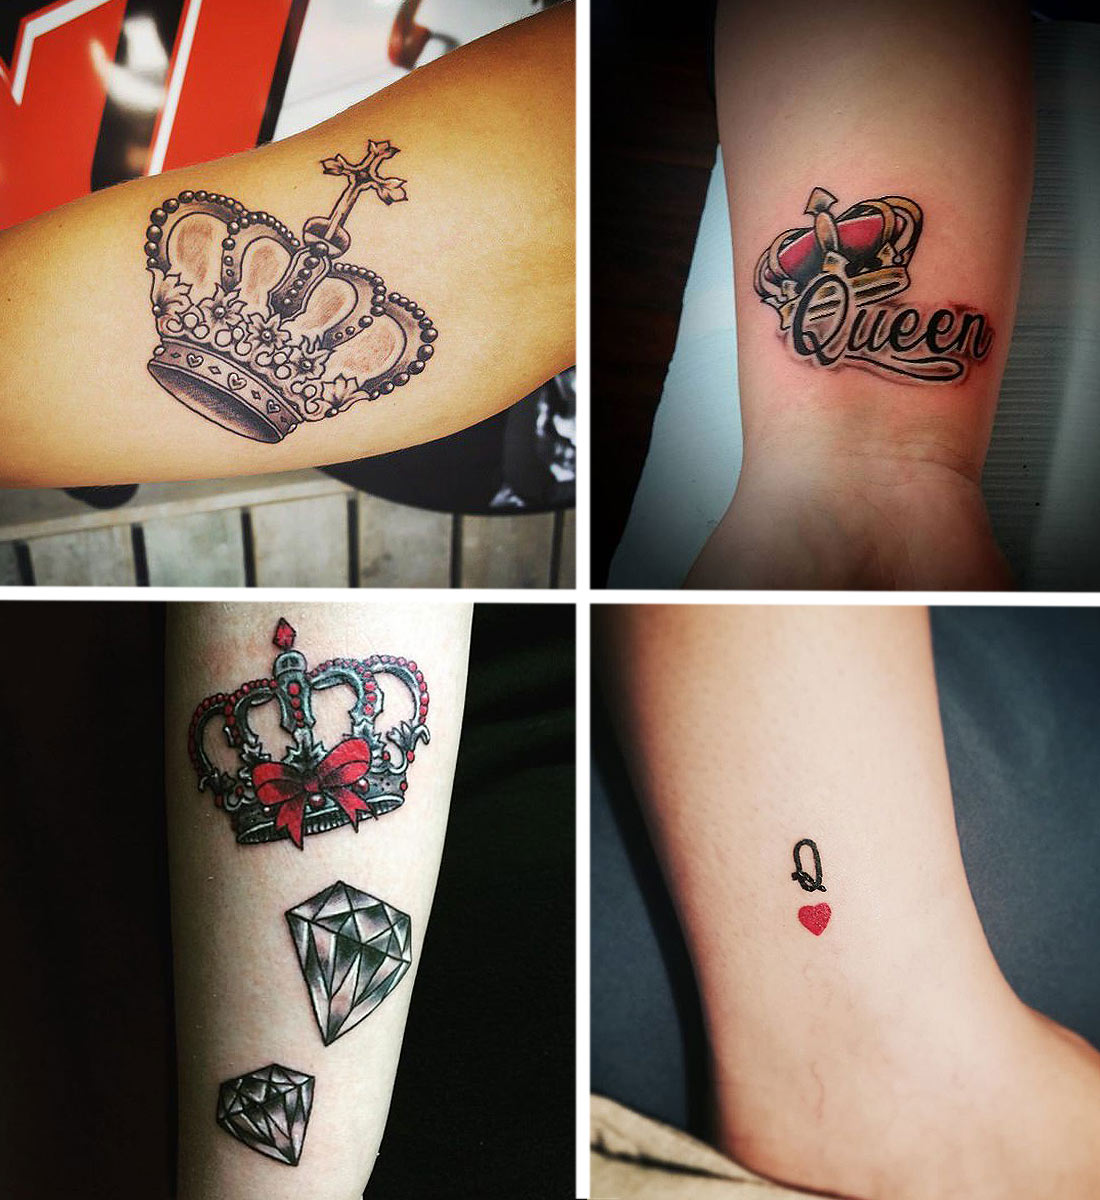 queen-tattoos-for-women-female-ladies-tattoo-styles